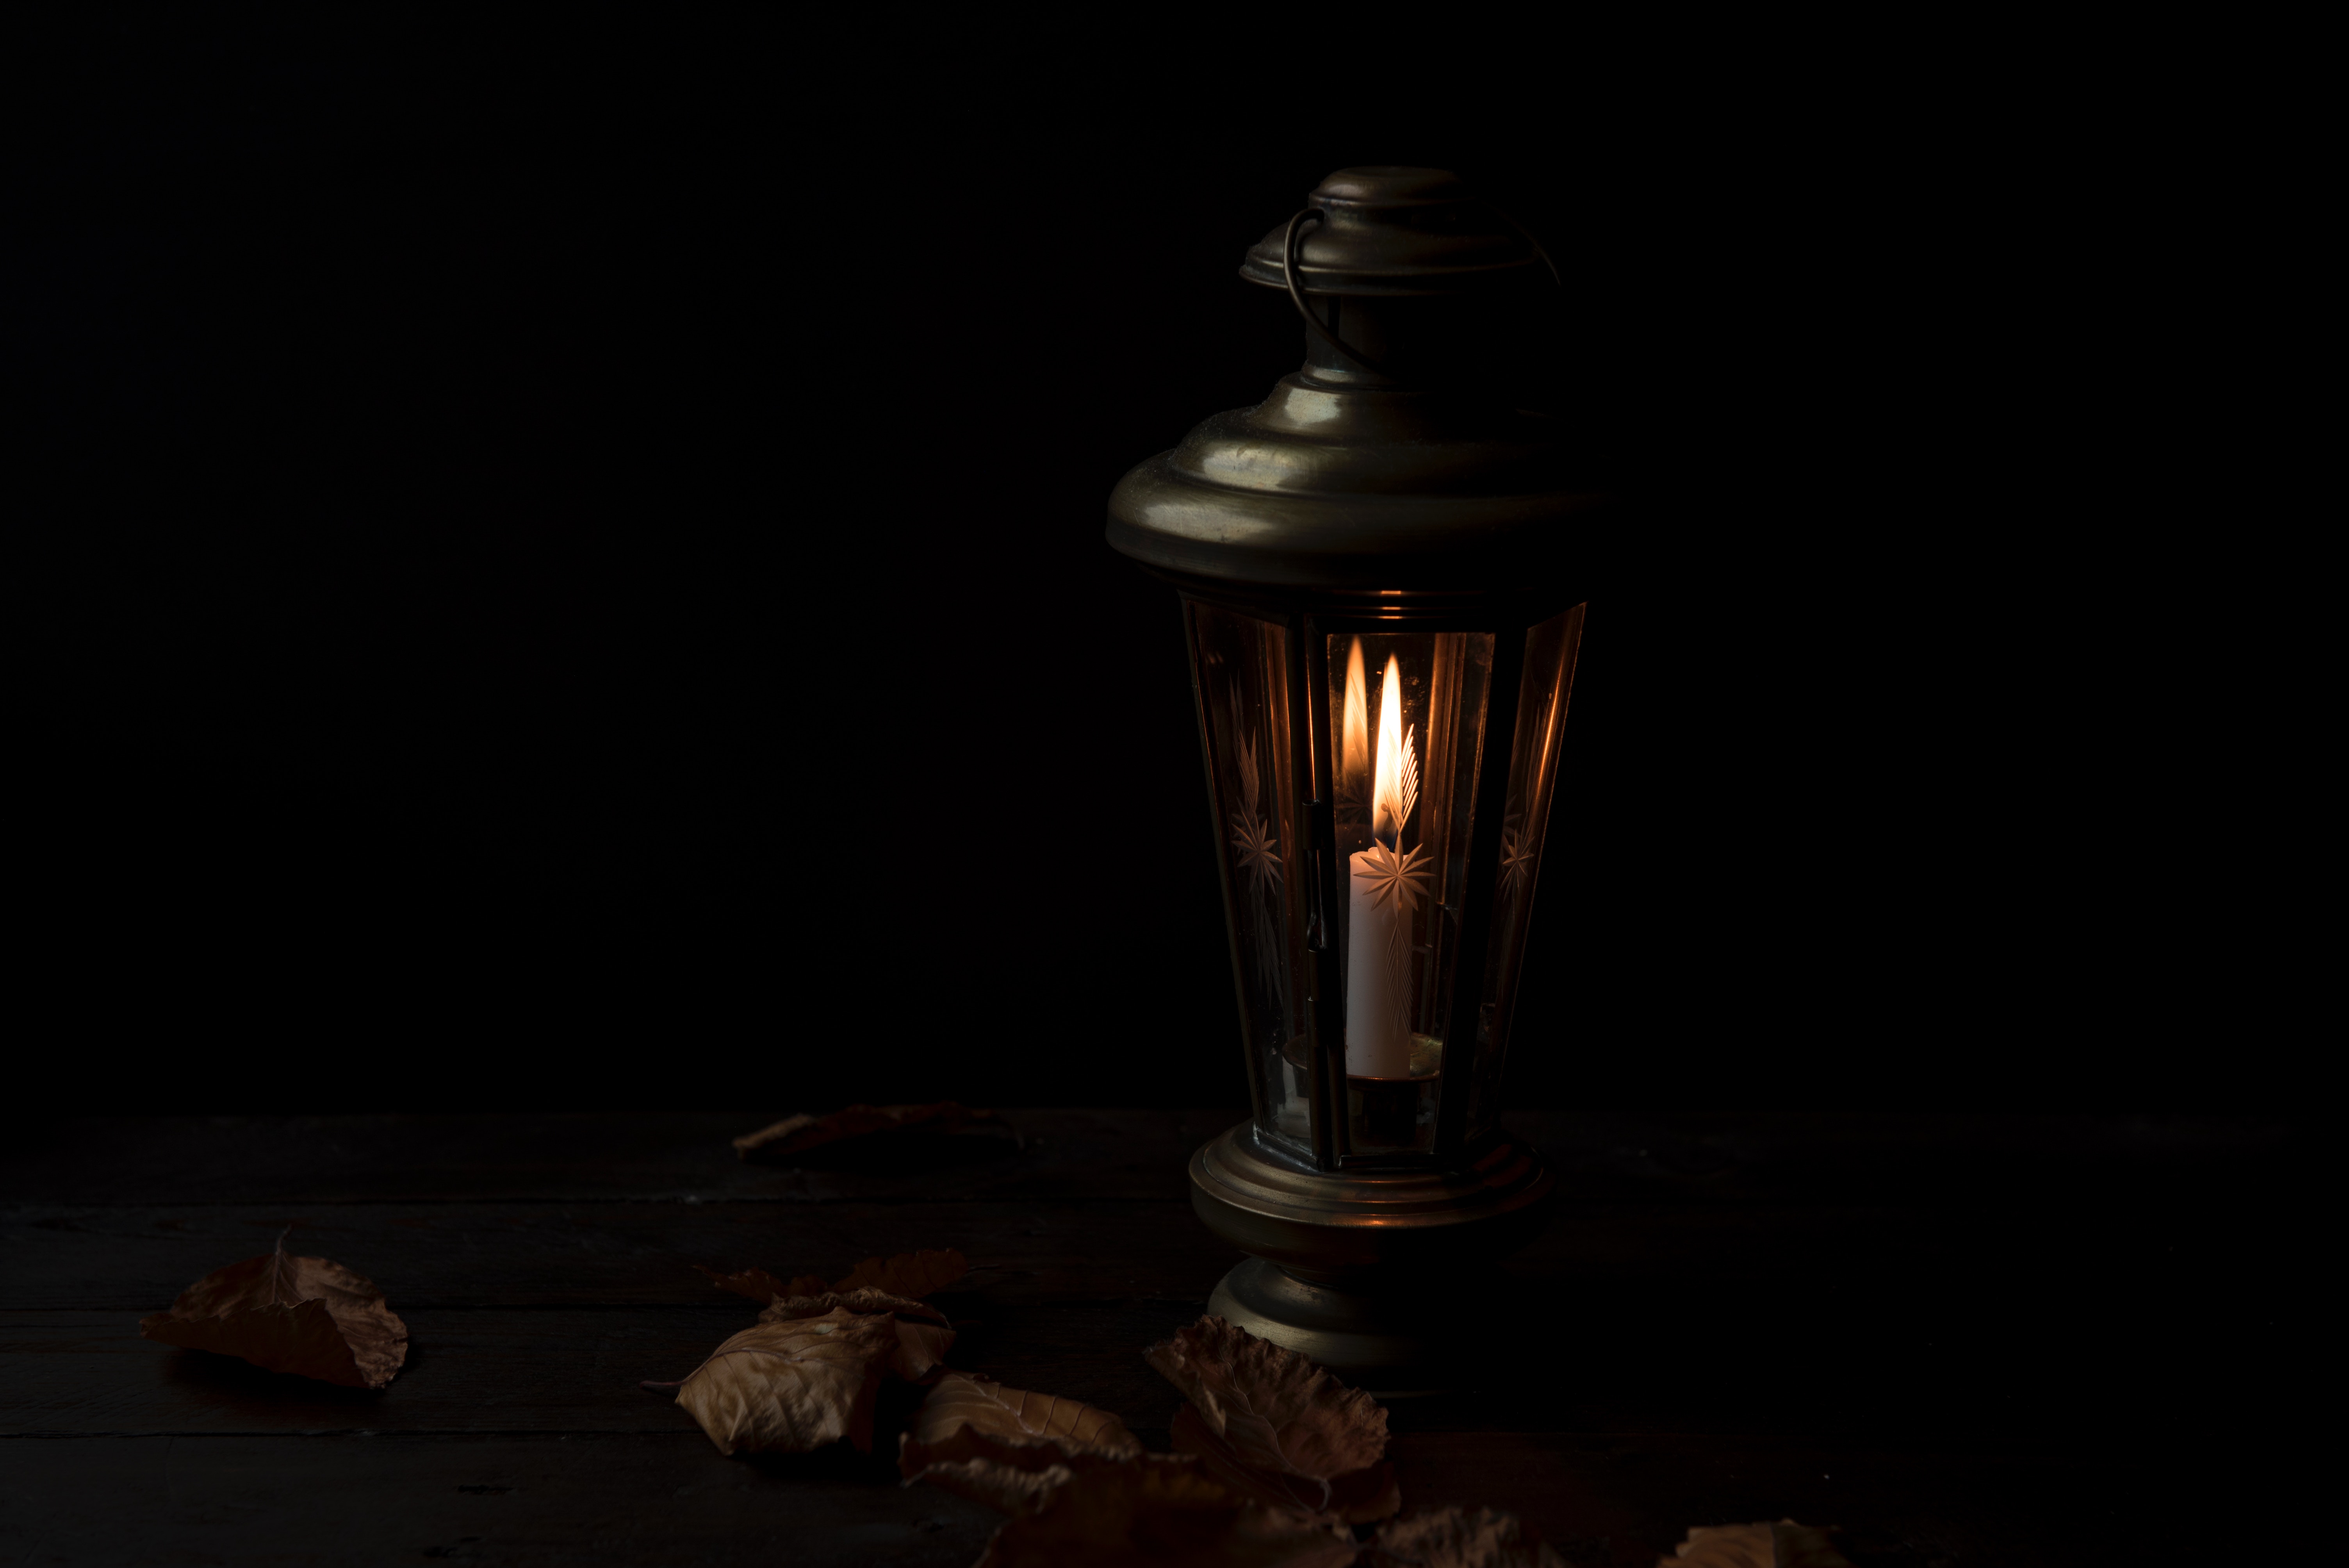 night, candle, dark, lamp wallpapers for tablet